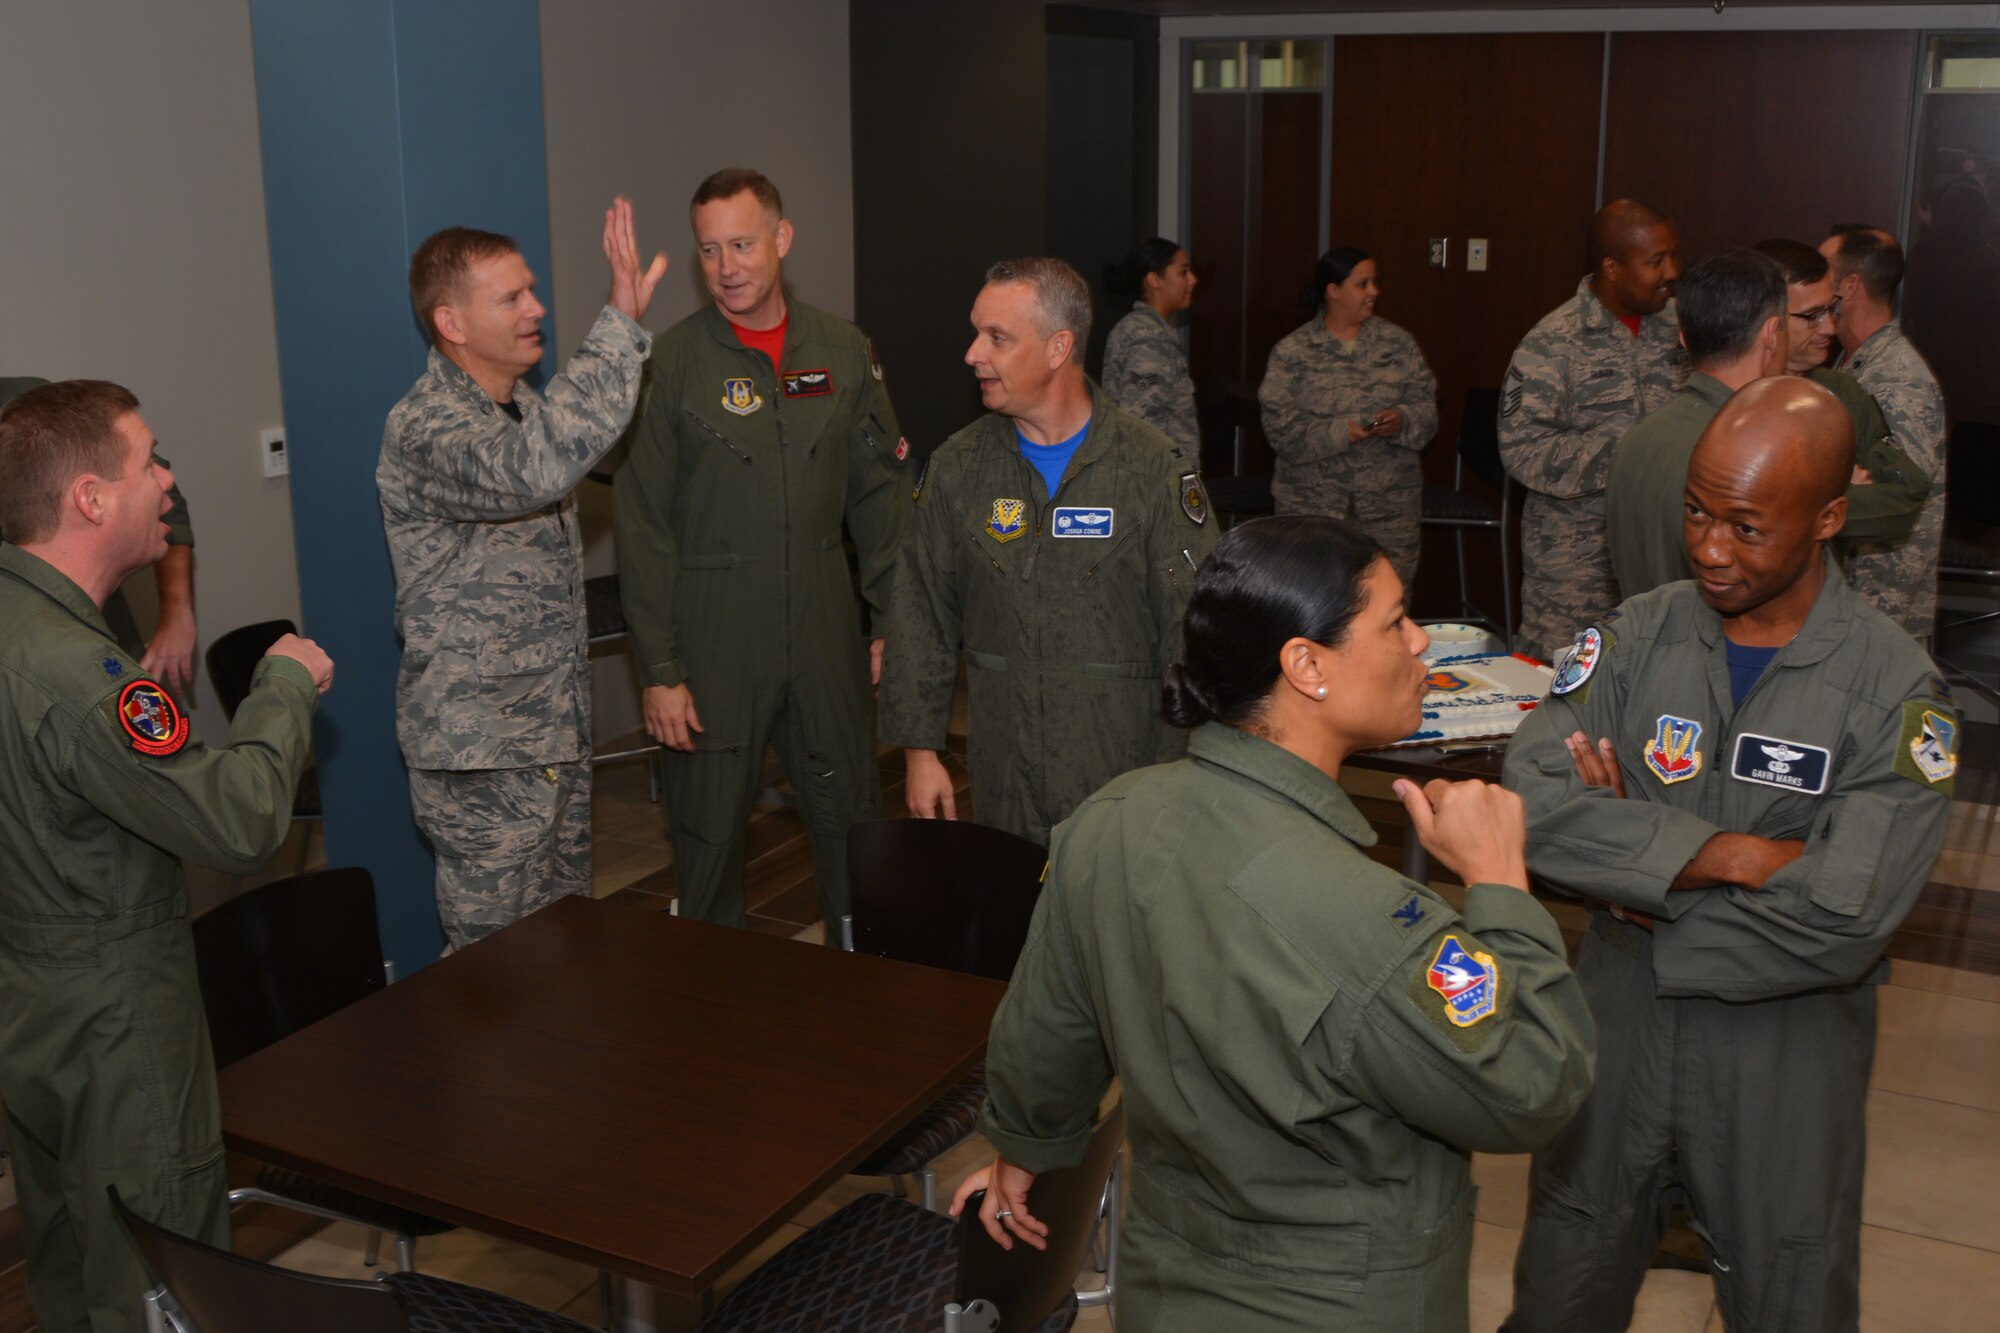 Active-duty and Reserve leadership from across the Tinker Air Force Base community share stories and jokes prior to the big event Sept. 7, 2018. The 513th Air Control Group is the only Air Force Reserve unit to fly and maintain the E-3 Sentry, an Airborne Warning and Control System aircraft that provides surveillance, warning and tactical control of U.S. and allied military aircraft. As a Reserve Associate Unit, ACG Airmen assigned work hand-in-hand with the active-duty 552nd Air Control Wing, contributing reliable AWACS support to numerous missions worldwide regularly. (Air Force photo by Master Sgt. Grady Epperly)